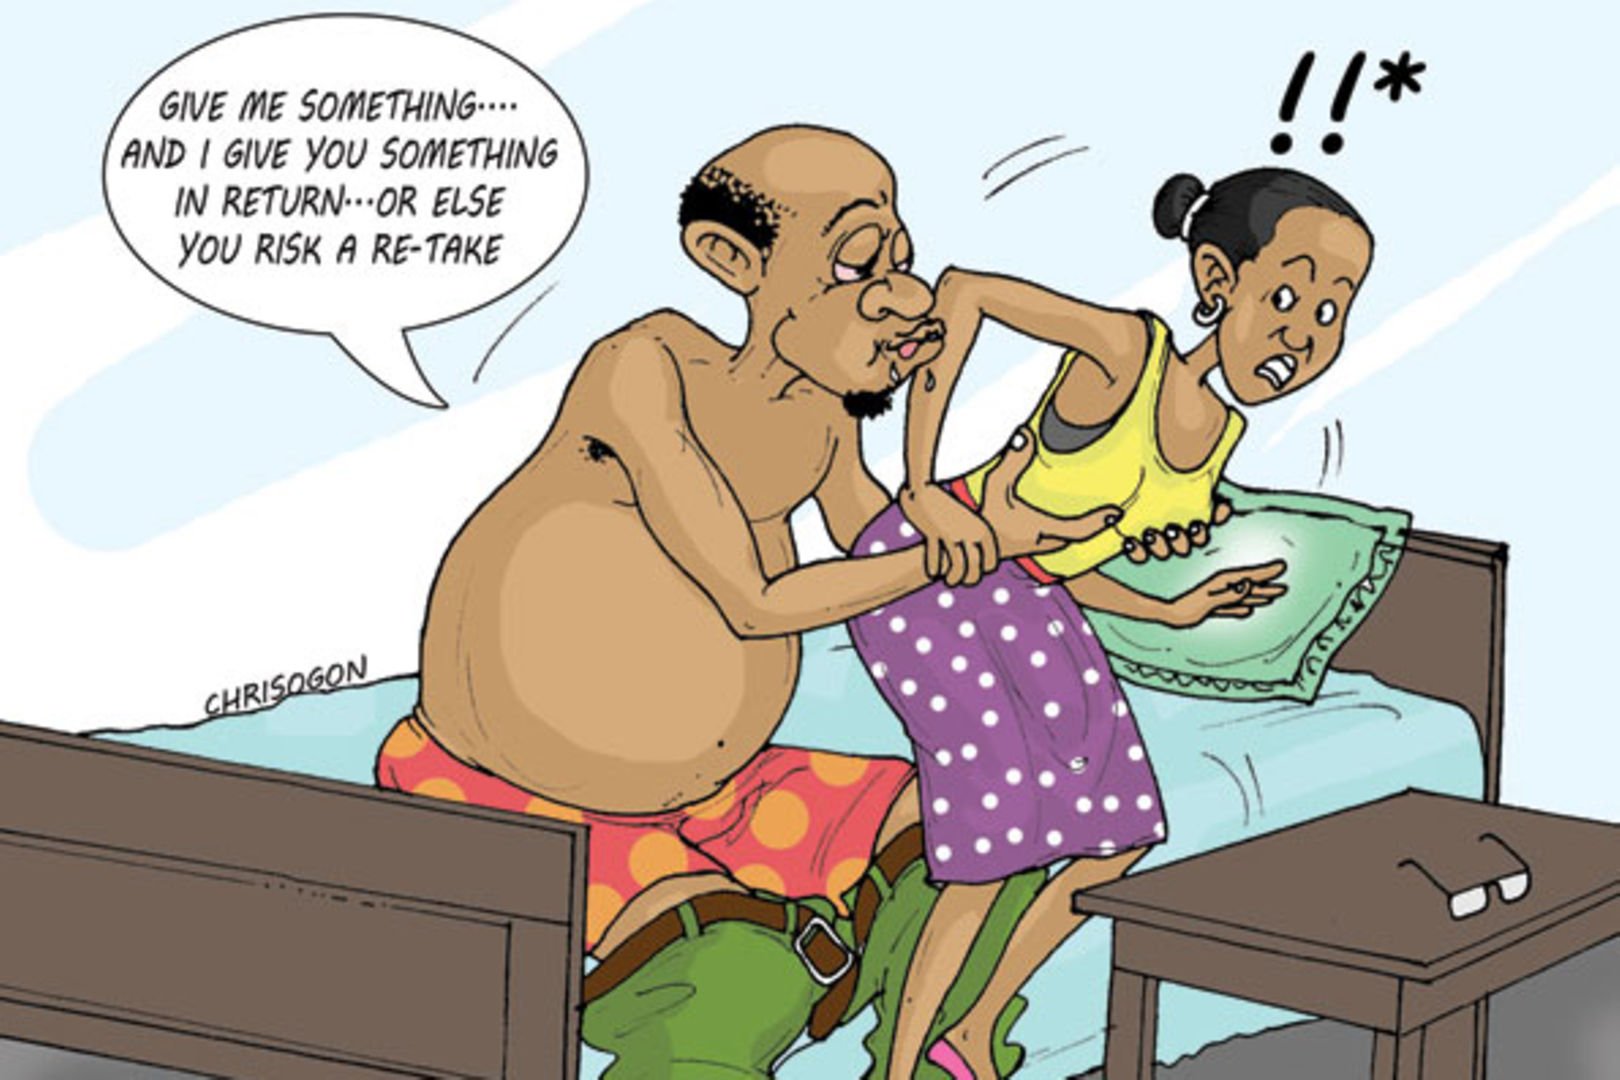 If A Man Beg His Wife For S*x Severally And She Refused? - Romance